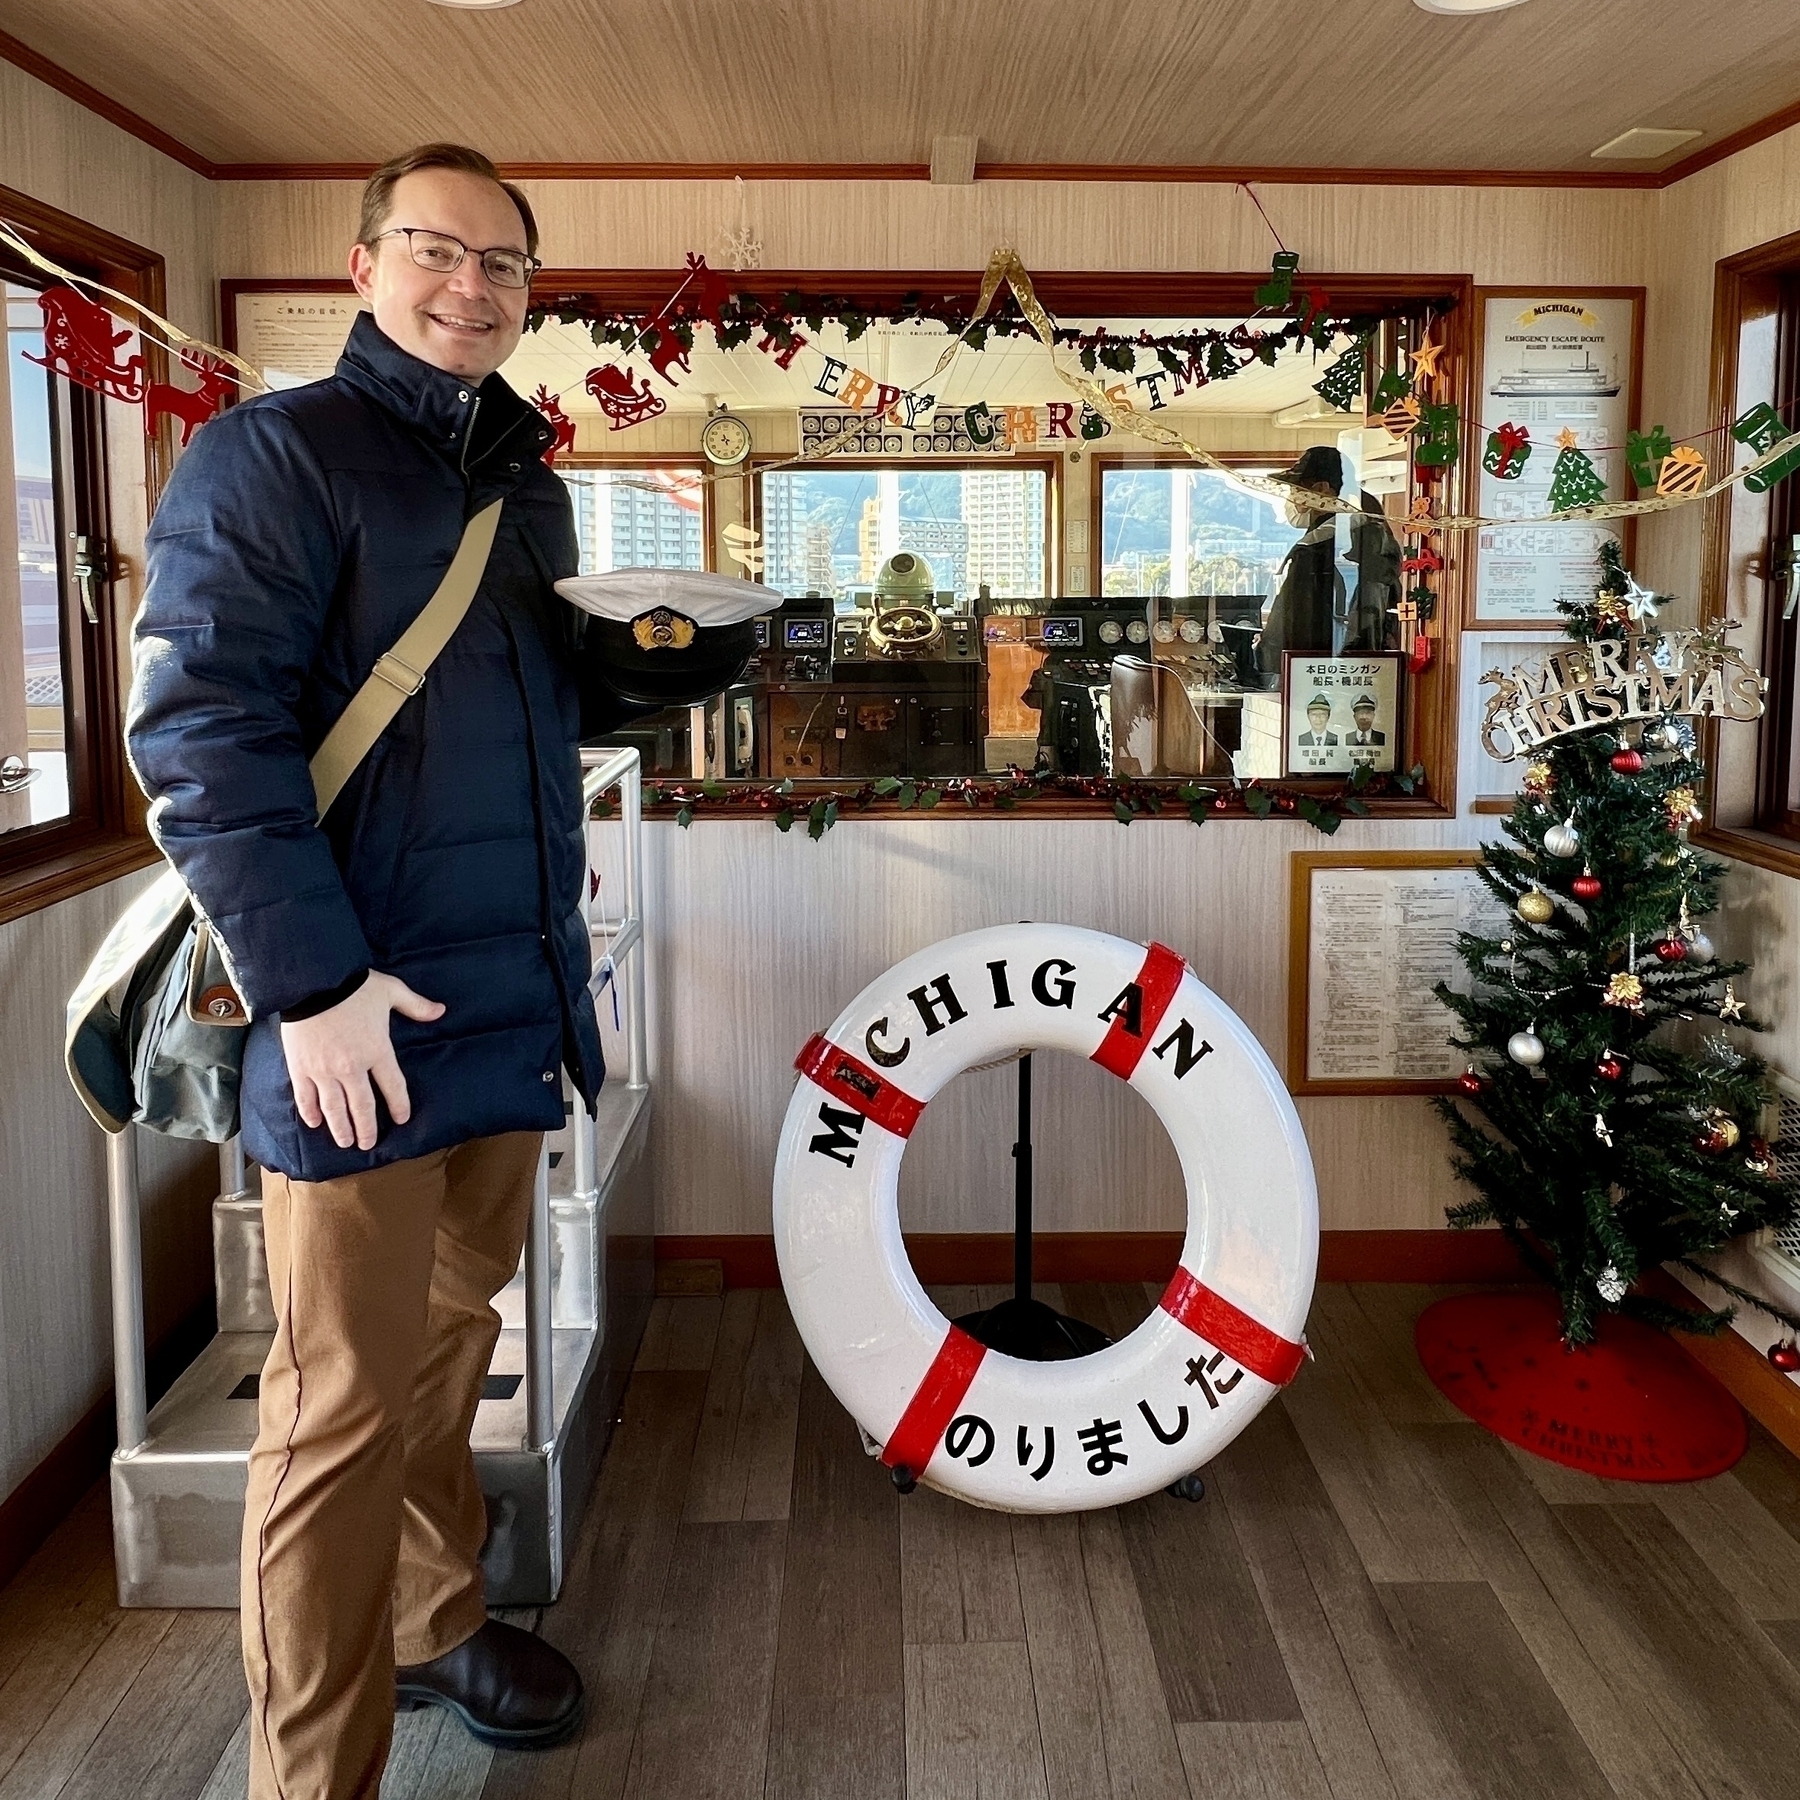 Chad poses in front of a window looking into the ship’s cabin. There is an Xmas tree to the right